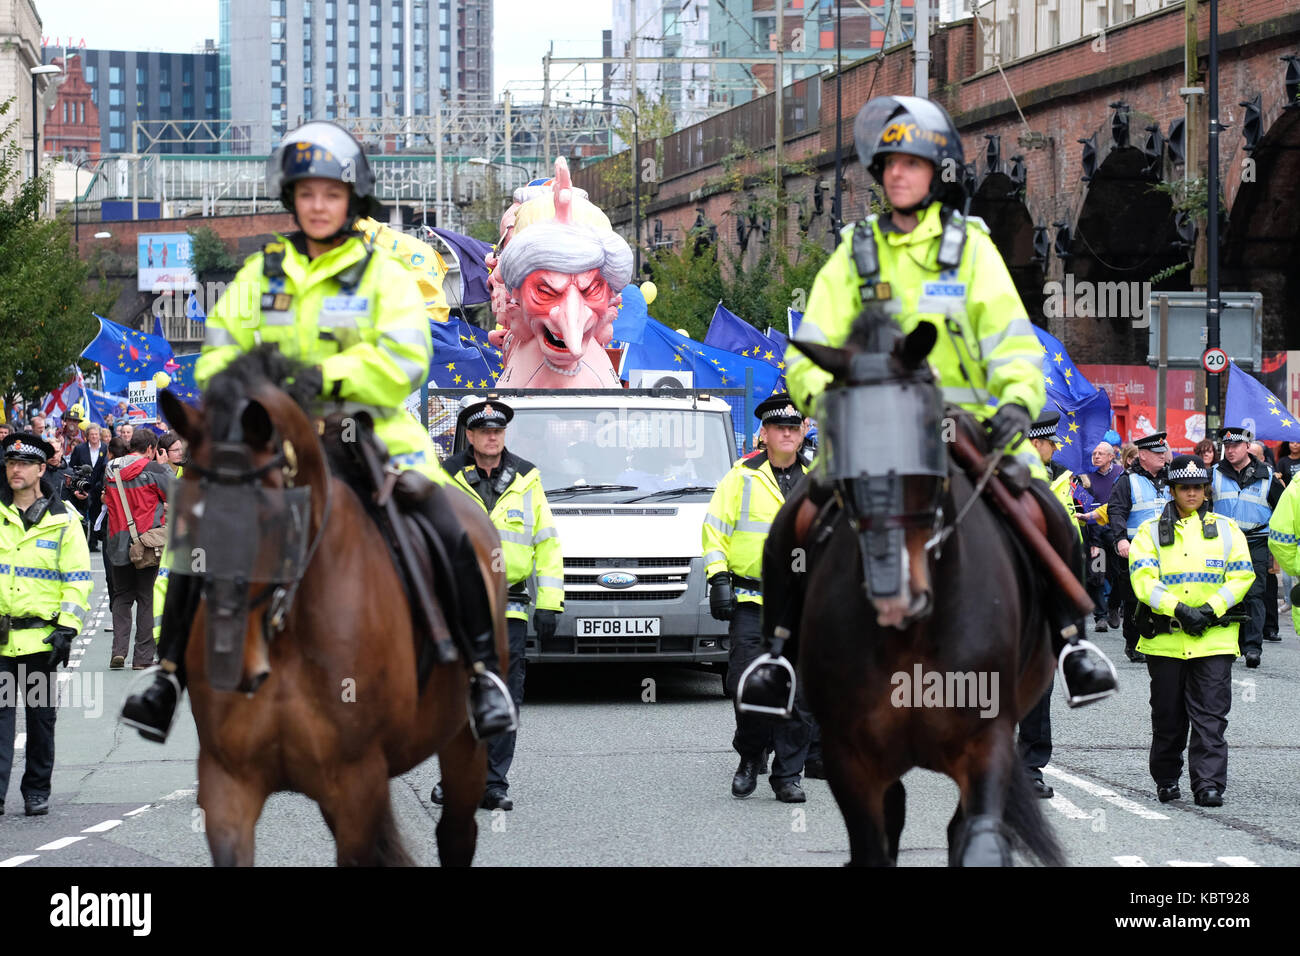 Stop Brexit march, Manchester city centre, Sunday 1st October 2017 - Large protest by thousands of Stop Brexit supporters through the city centre of Manchester on the opening day of the Conservative Party Conference.  Steven May / Alamy Live News Stock Photo